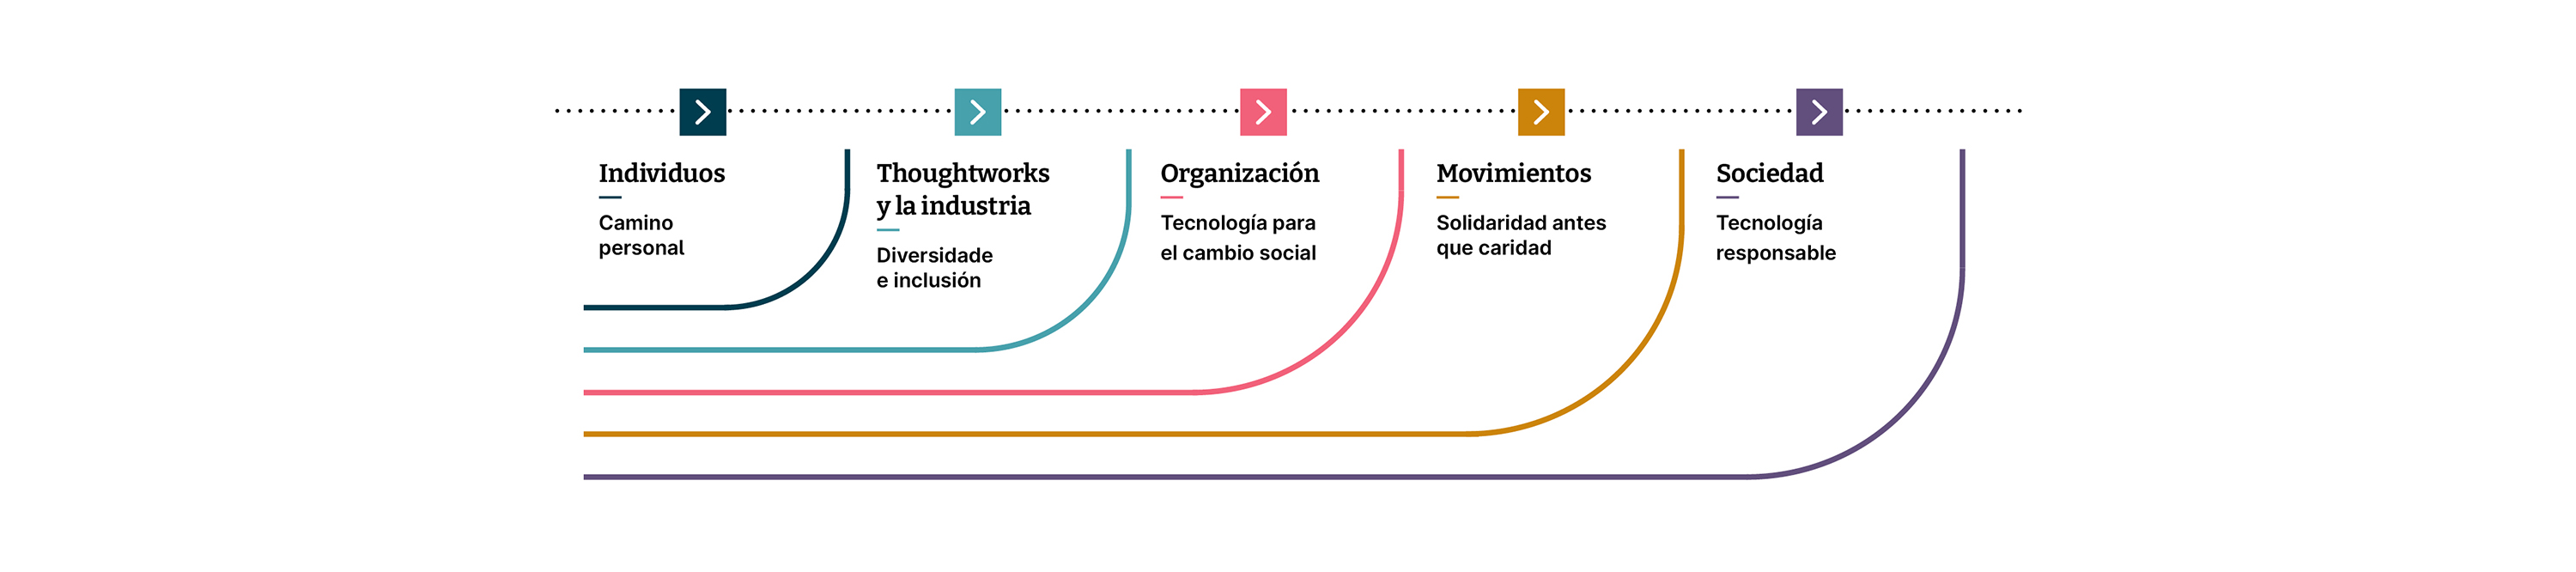 The social change framework: a layered diagram showing Individuals (the personal journey); Thoughtworks and industry (diversity, equity and inclusion); Organizations (tech for social change);  Movements (solidarity over charity); and Society (responsible technology)